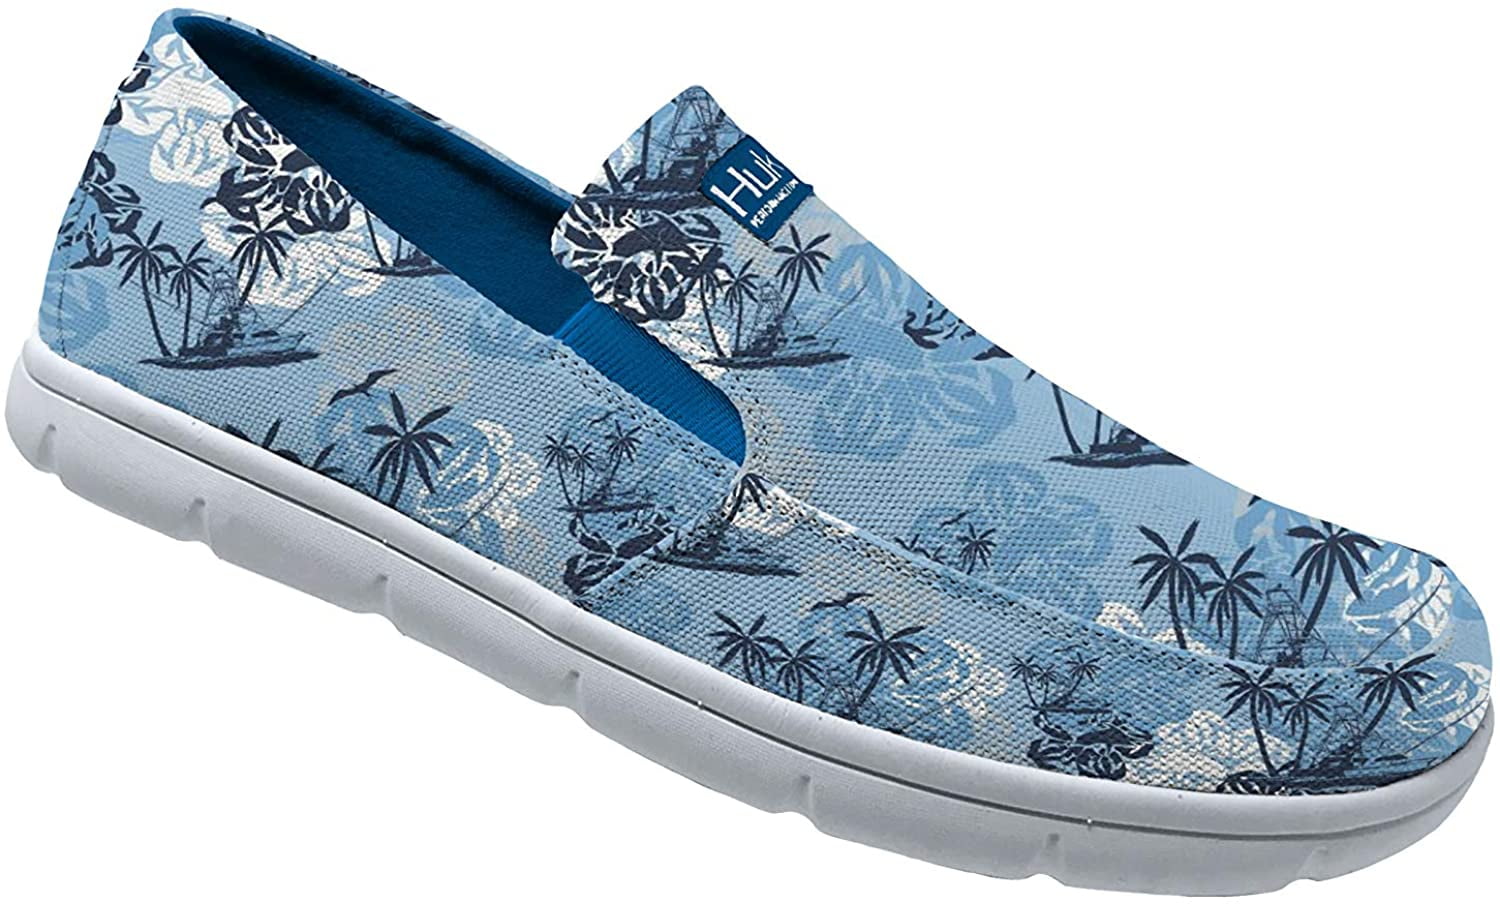 HUK homme BREWSTER Paradise Pass Bleu Glace Taille 12 slip on pêche Chaussures 